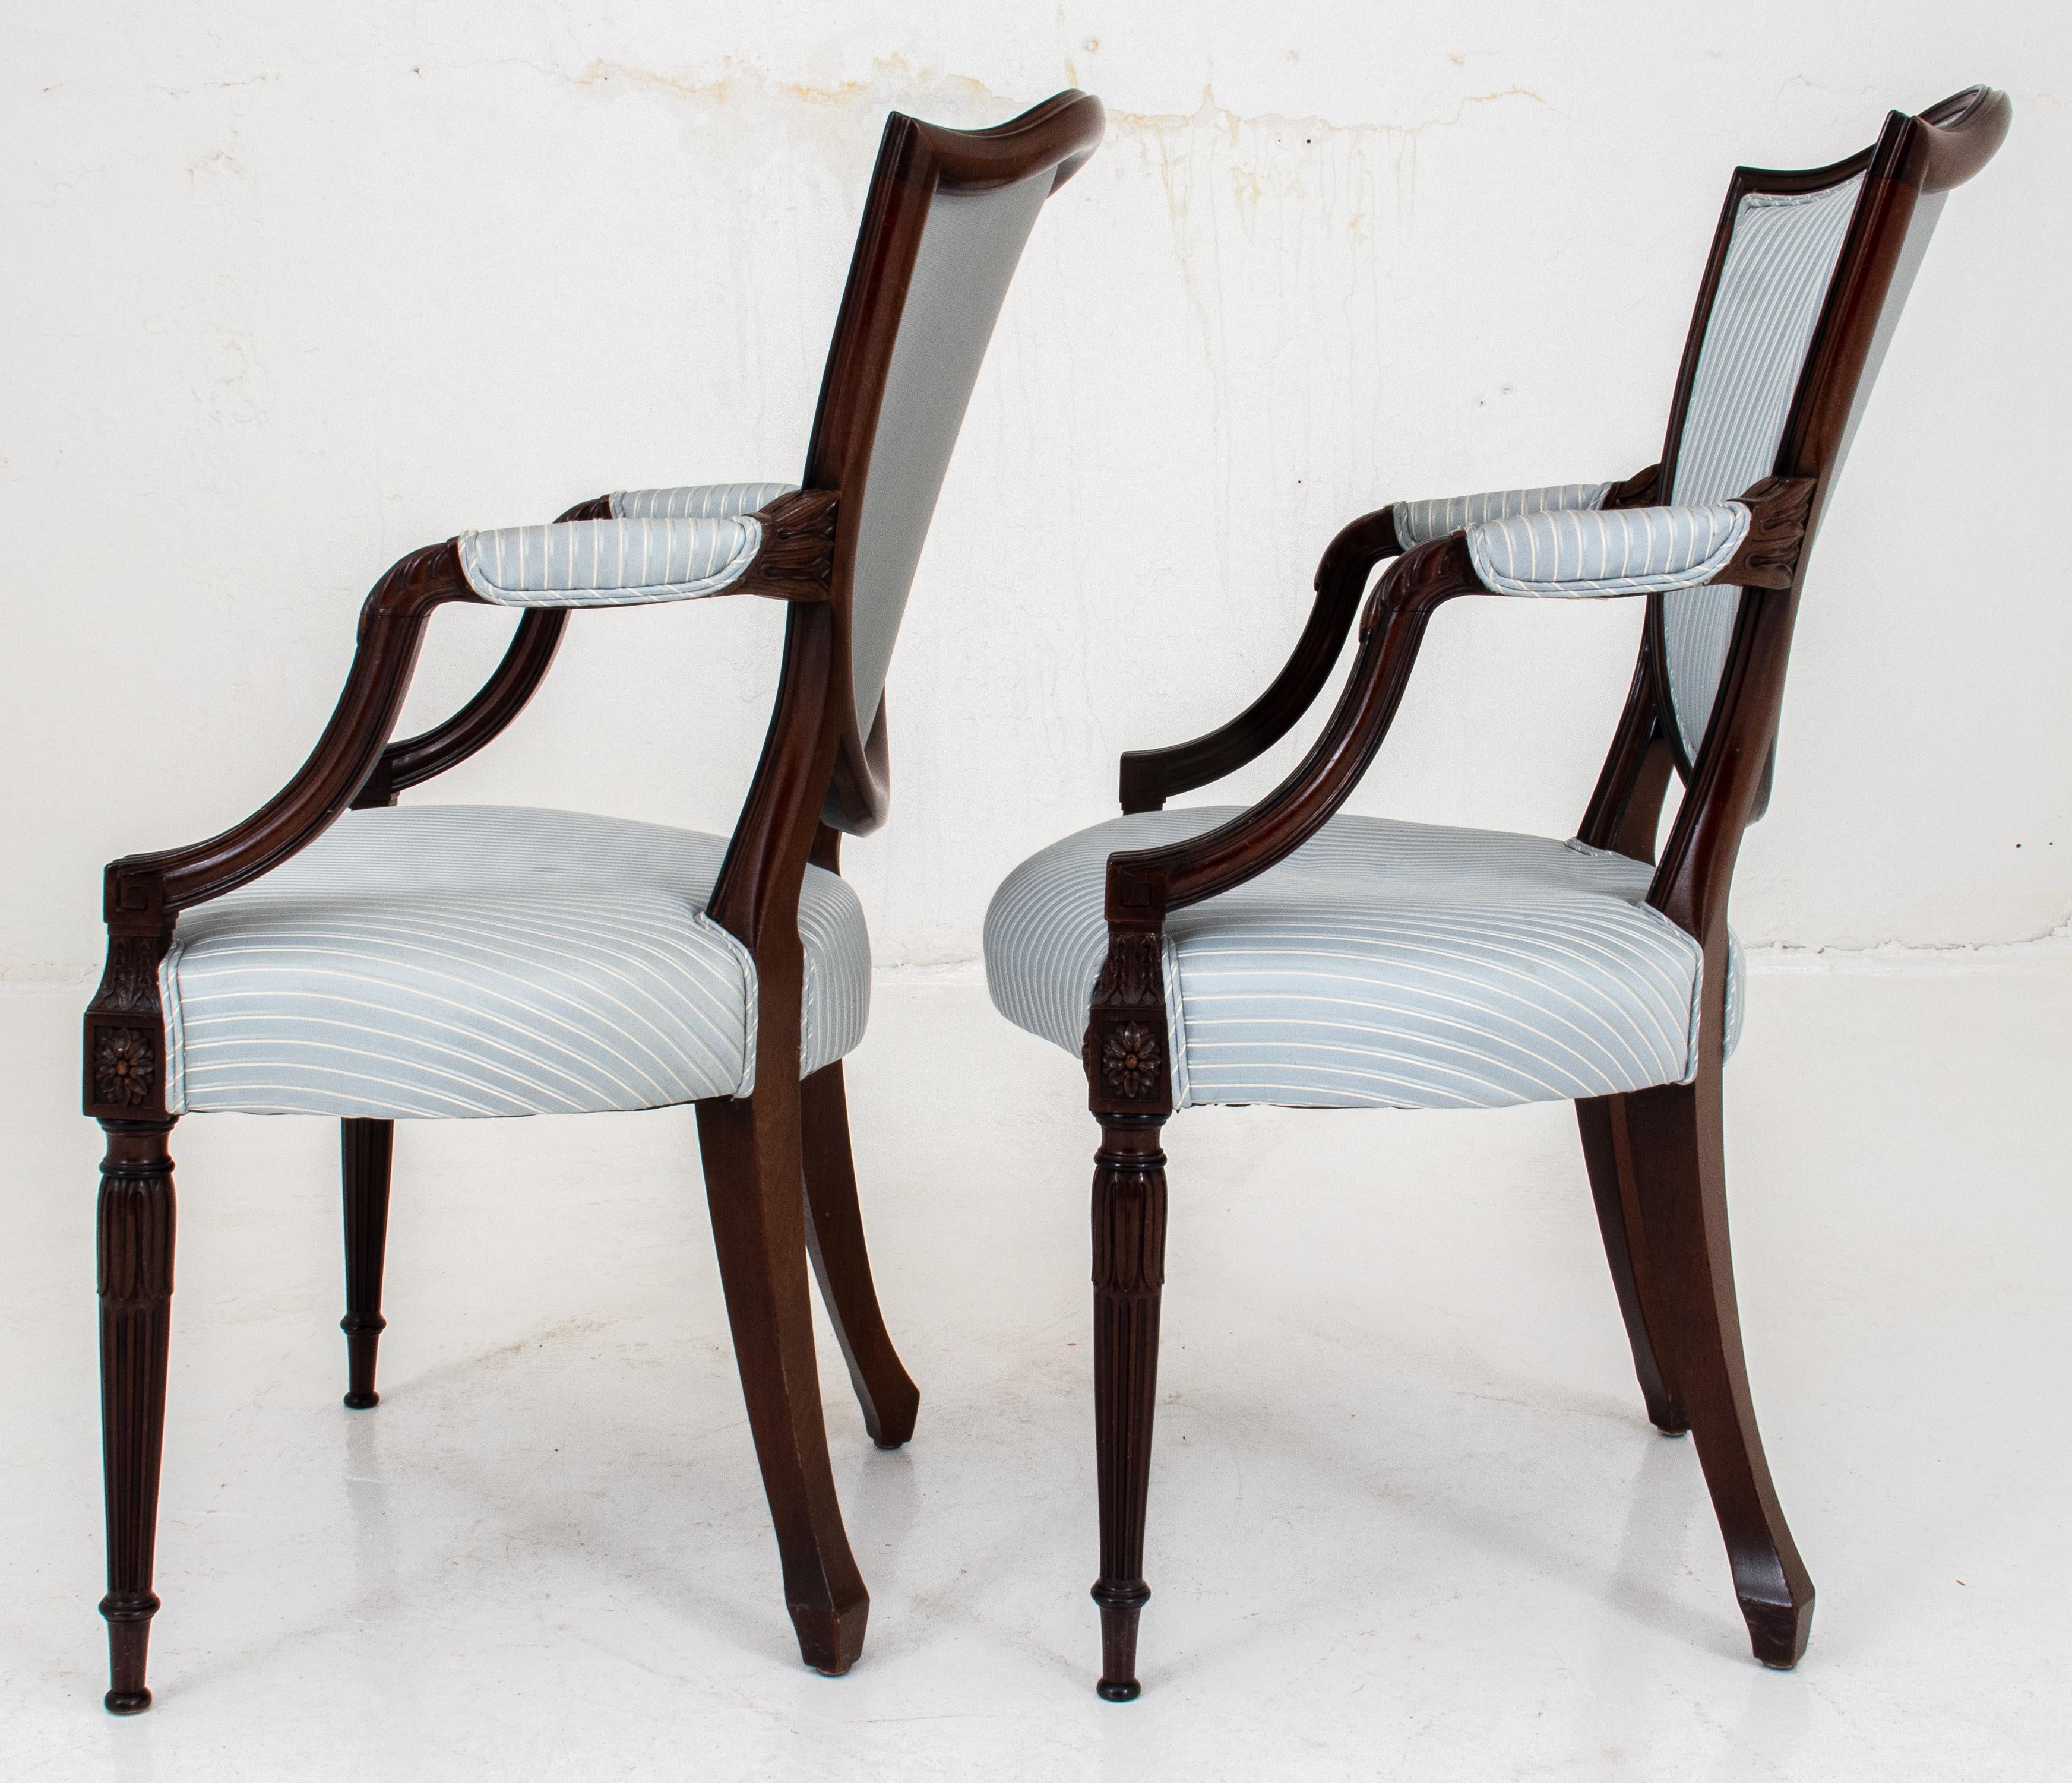 Set of fourteen George III style dining chairs in the manner of Thomas Sheraton, comprising twelve side chairs and two armchairs carved with foliate motif. 

Dimensions: 40